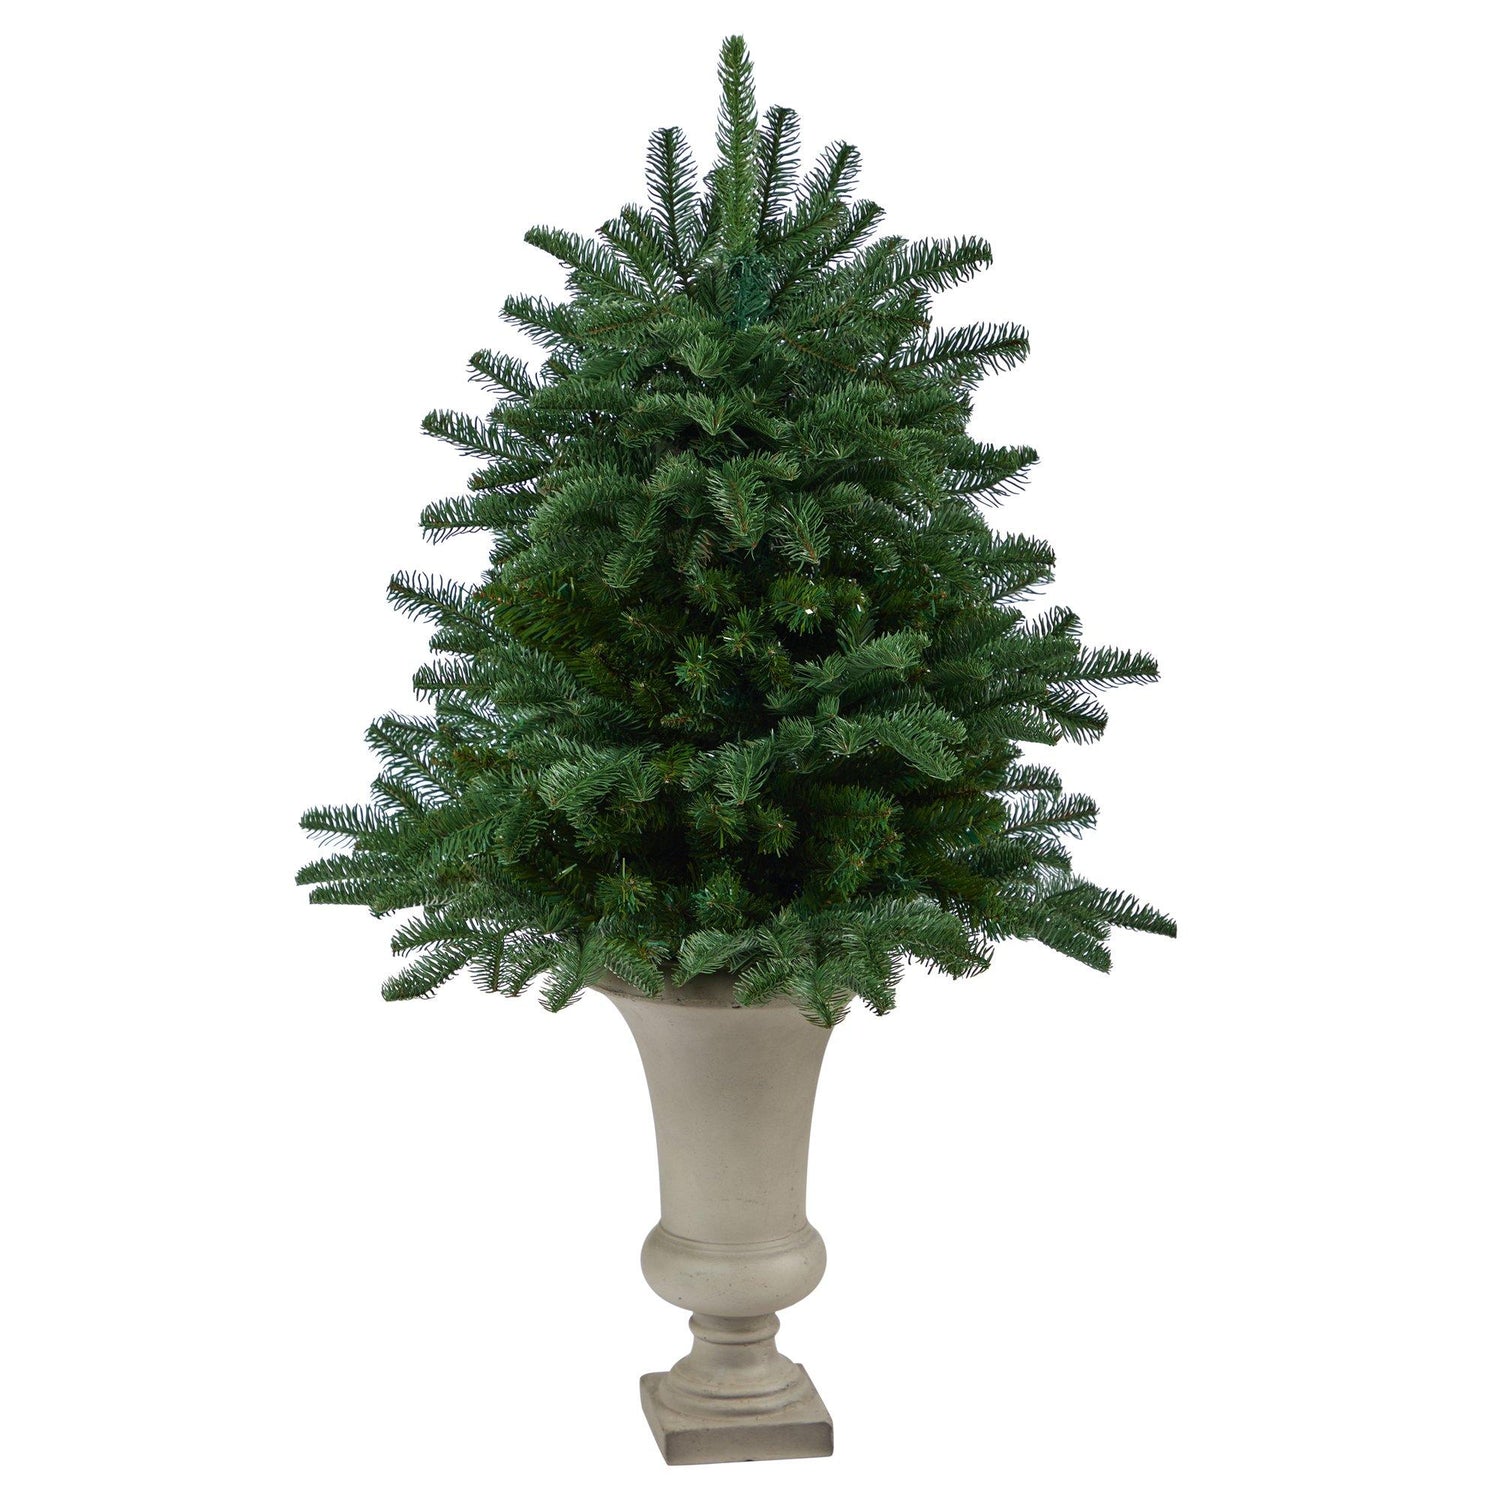 3.5’ South Carolina Spruce Artificial Christmas Tree with 458 Bendable Branches in Sand Colored Urn